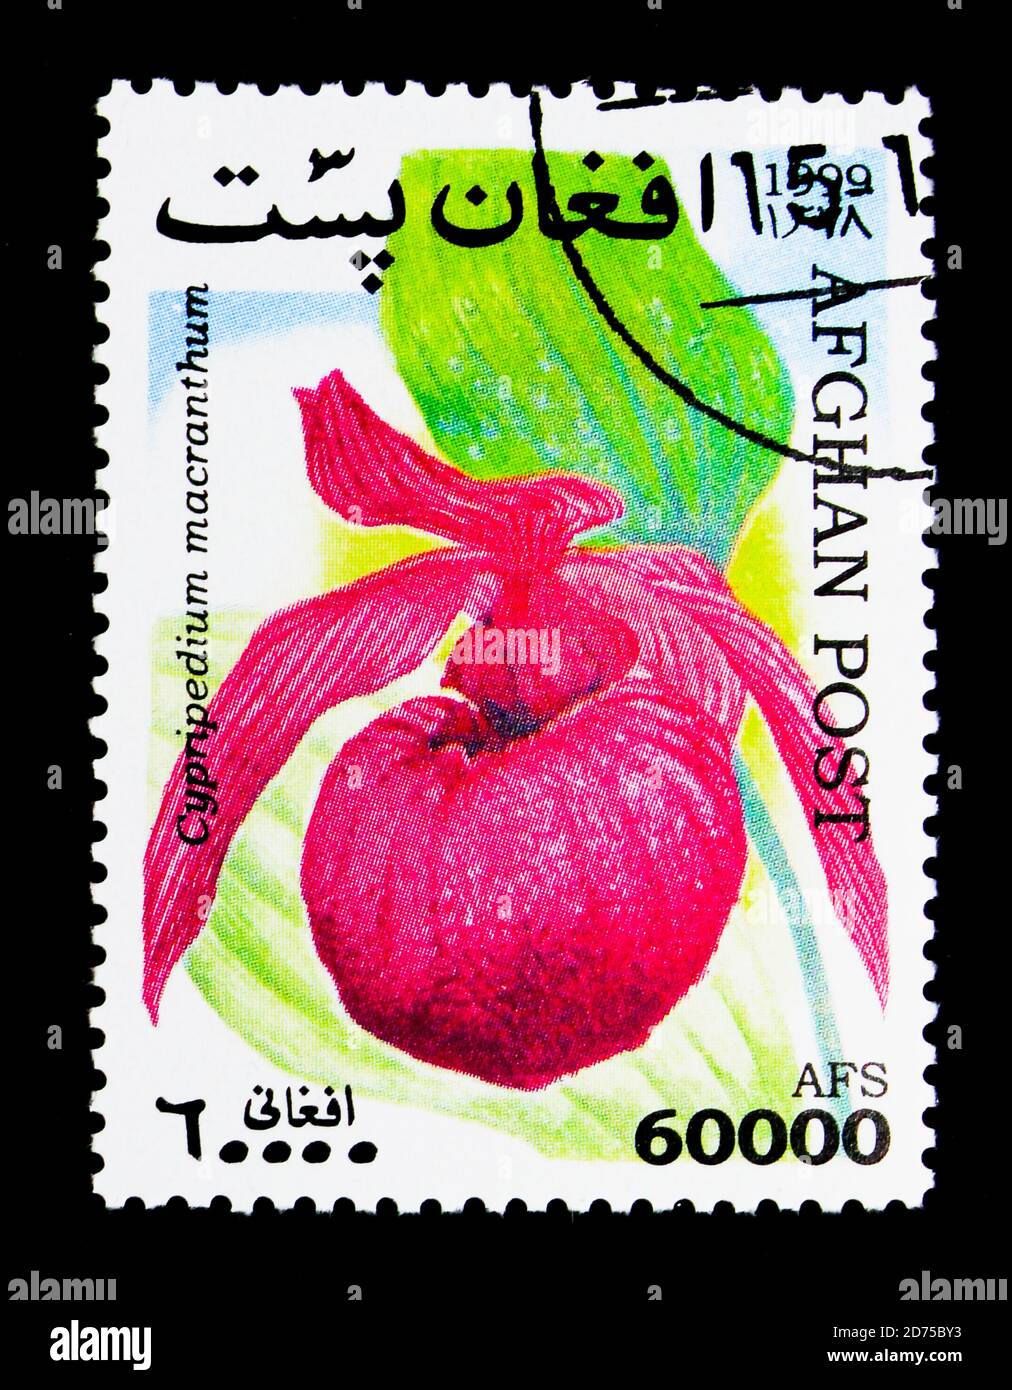 MOSCOW, RUSSIA - NOVEMBER 25, 2017: A stamp printed in Afghanistan shows Cypripedium macranthum - Large-flowered Cypripedium, Orchids serie, circa 199 Stock Photo